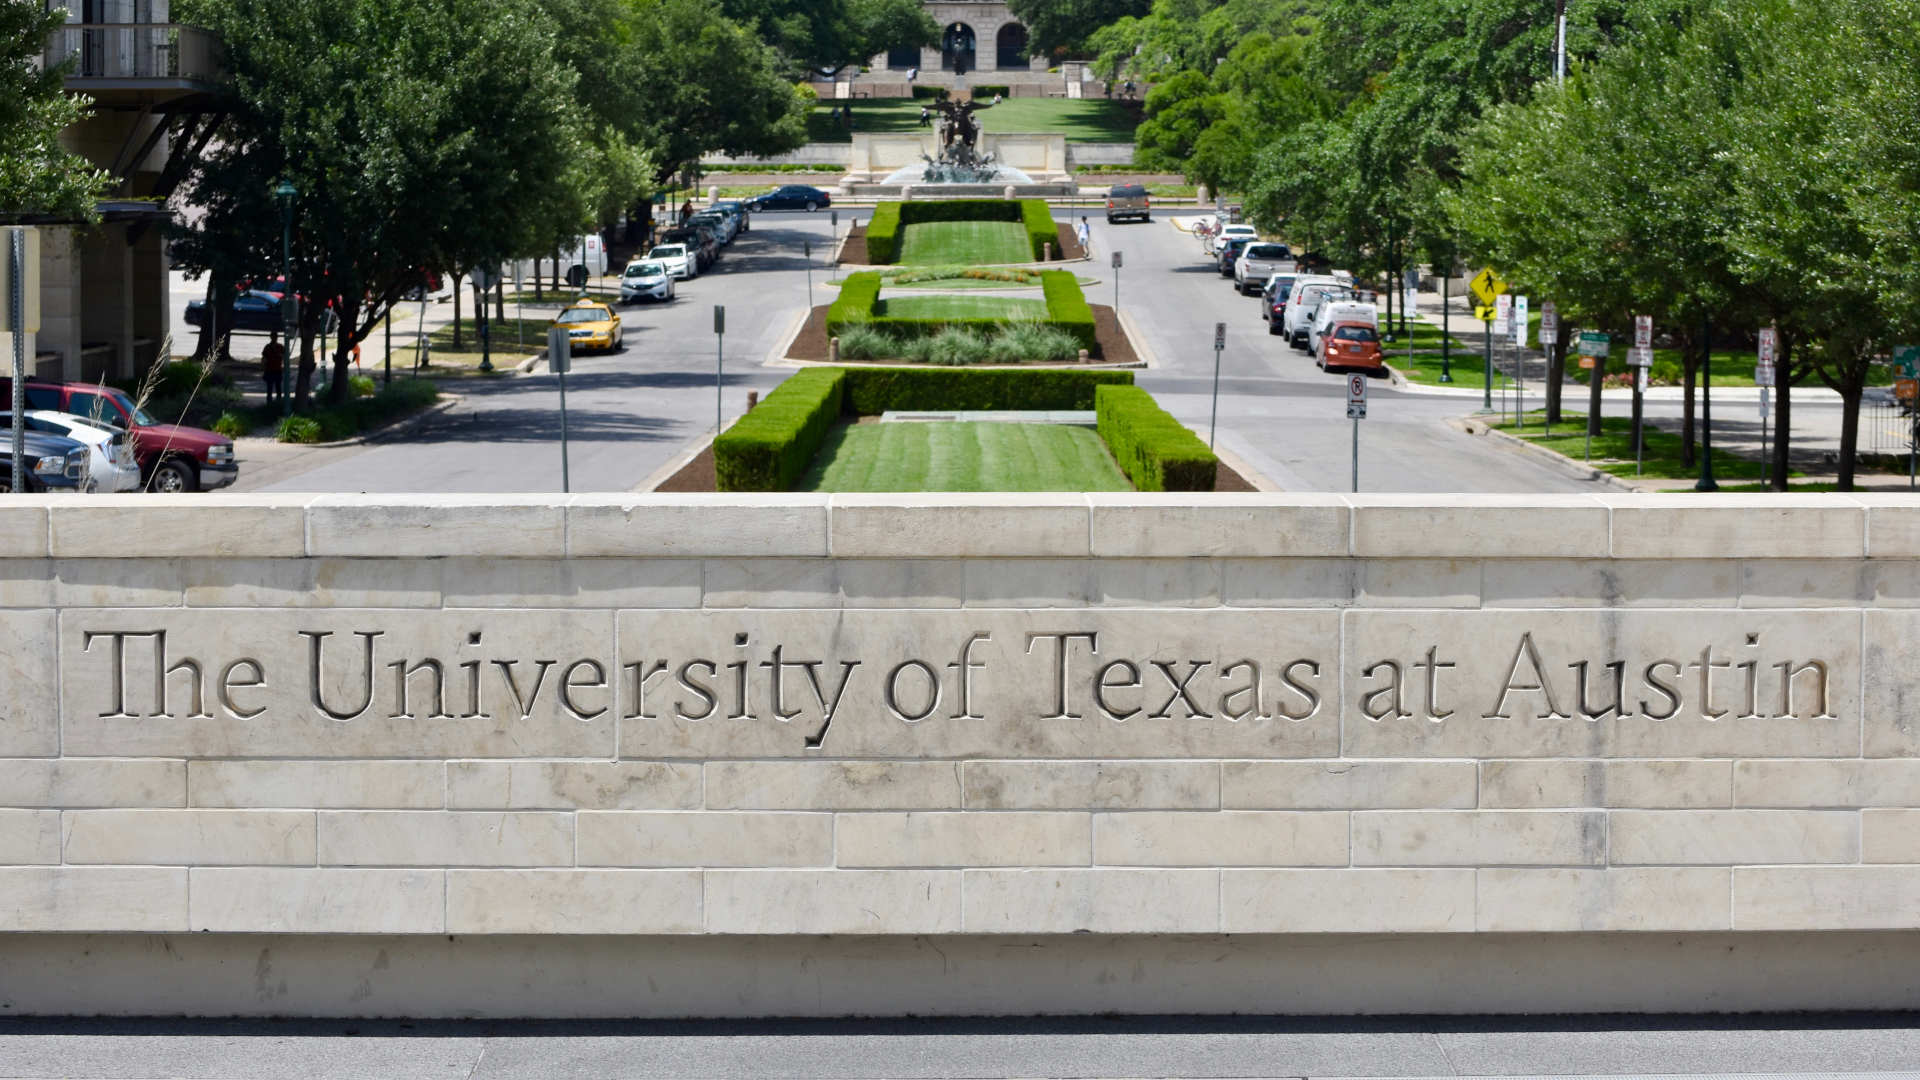 Last year, the University of Texas at Austin stopped using an AI evaluation system that scored applications to the graduate program in computer science based on historical admissions data.